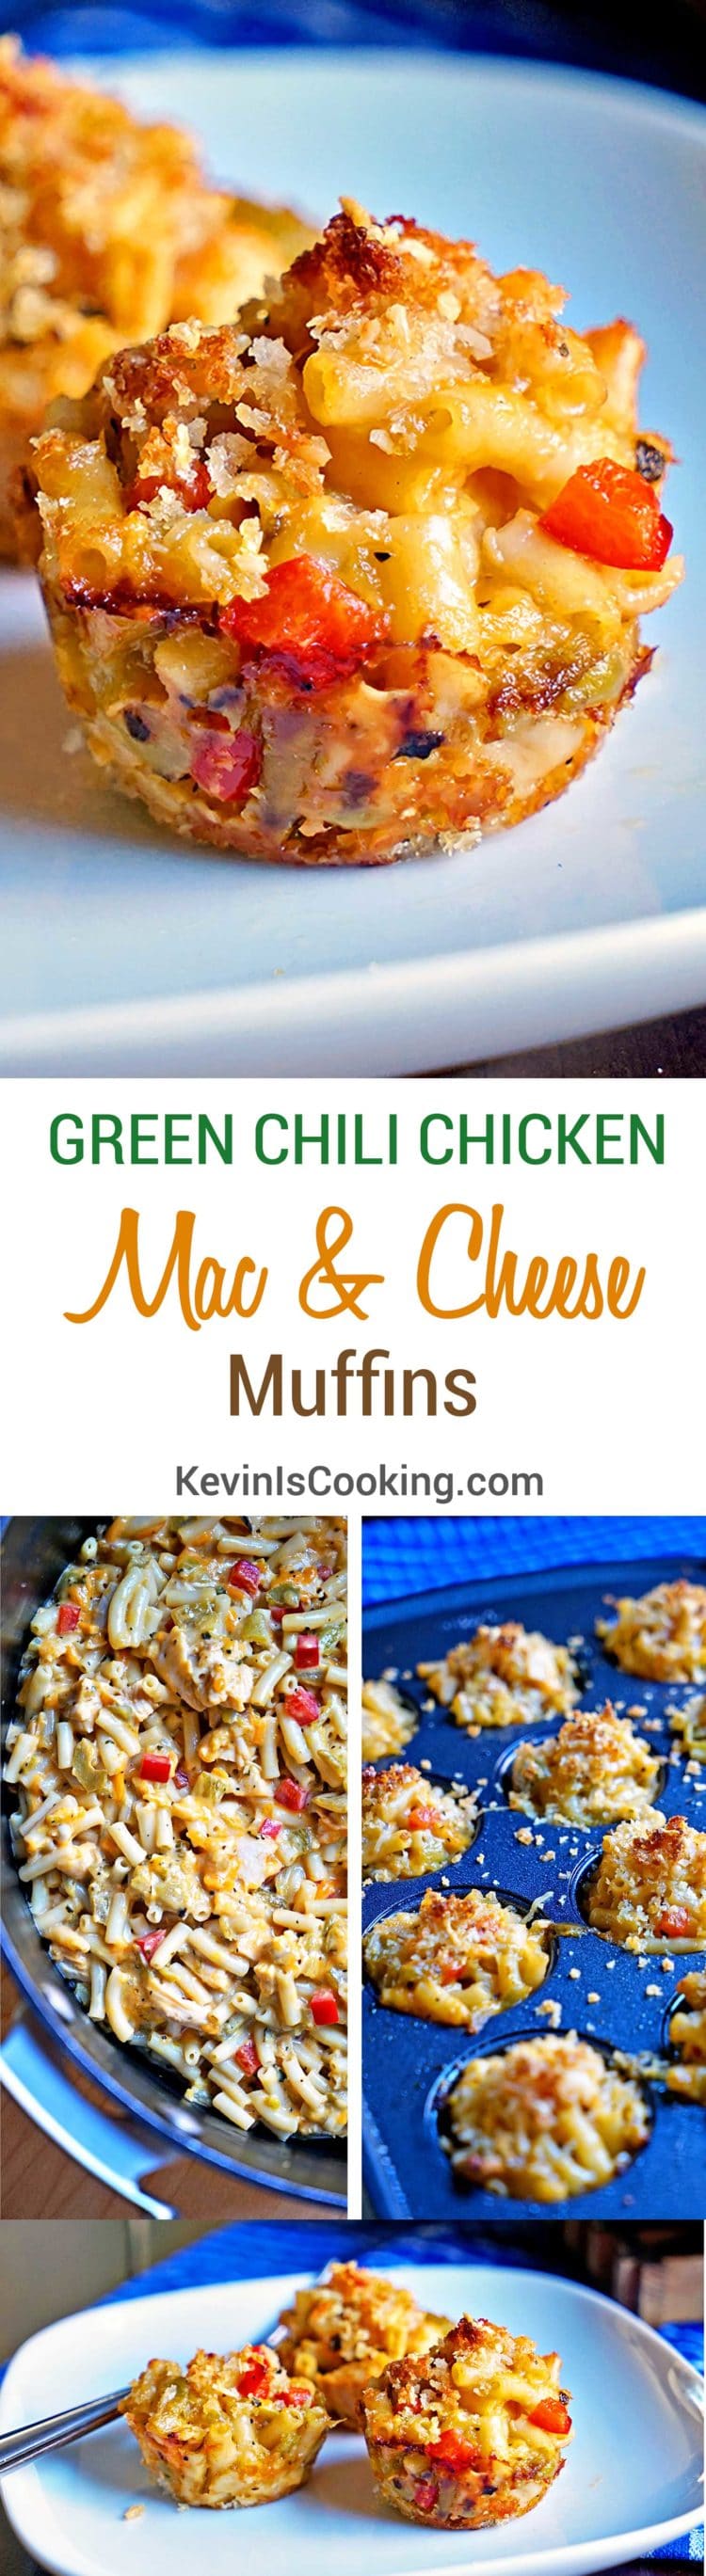 Green-Chili-Chicken-Mac-and-Cheese-Muffins. www.keviniscooking.com